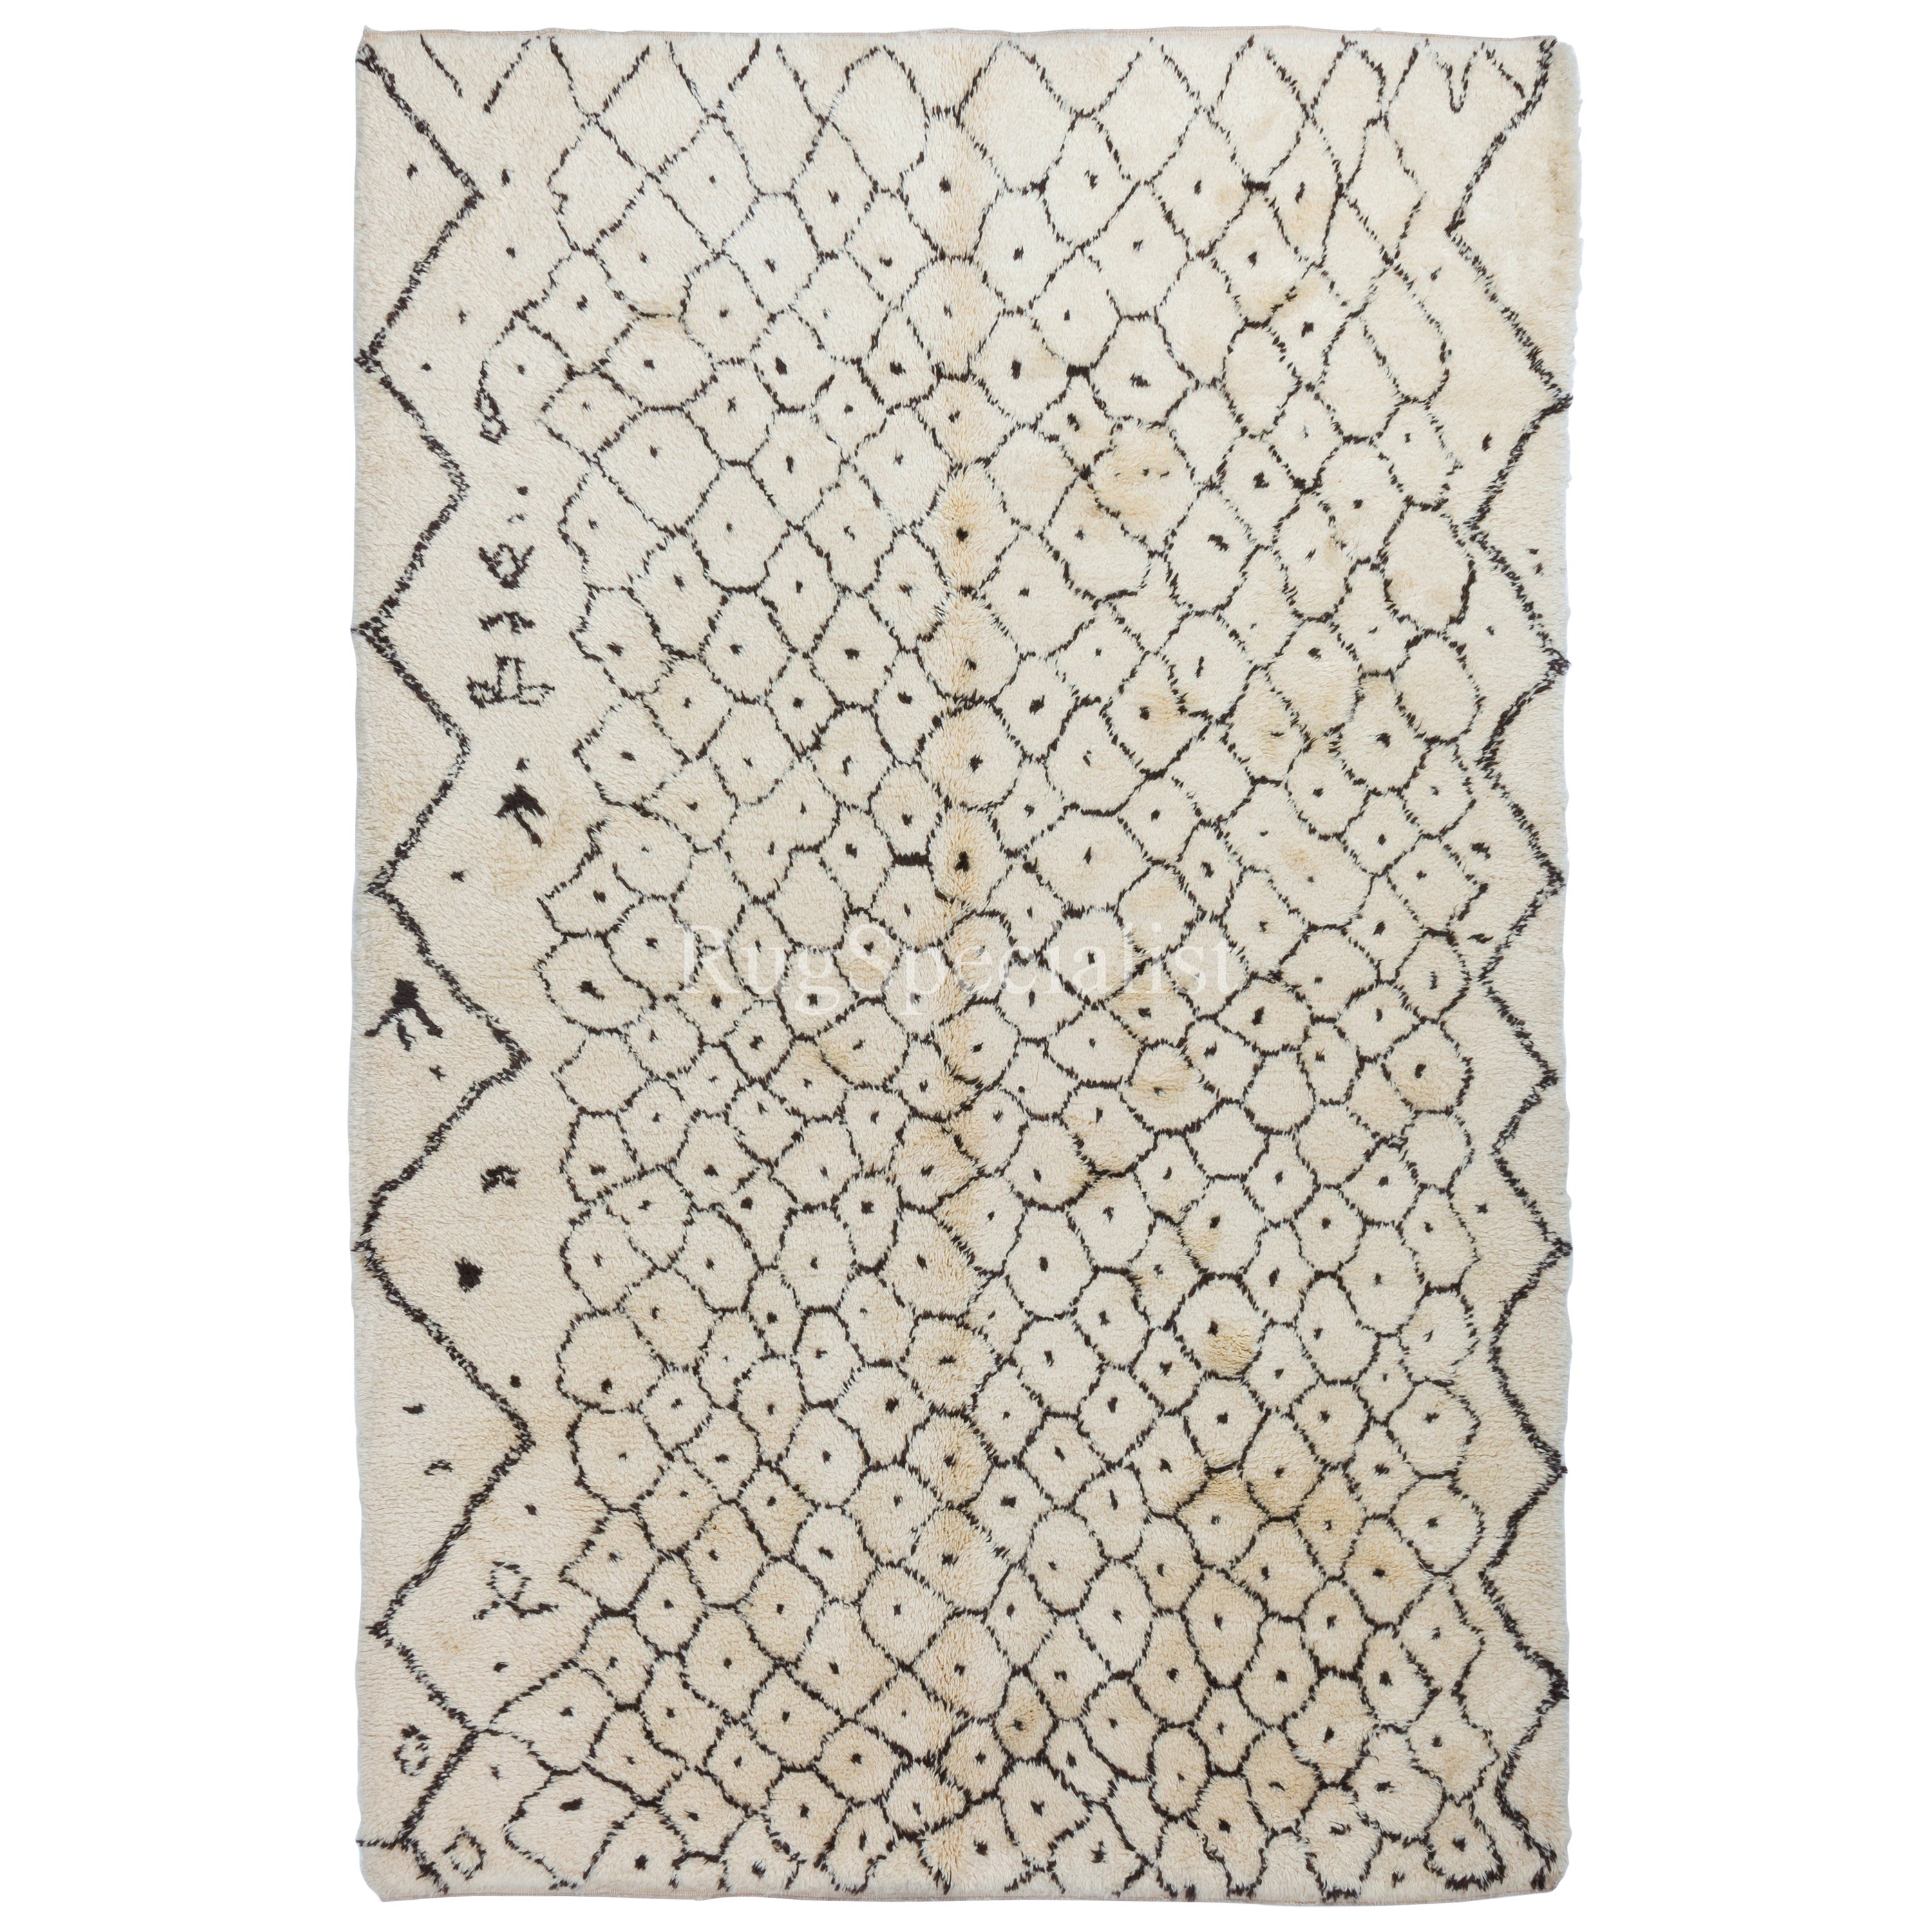 6.6x10.2 Ft Contemporary Moroccan Berber Azilal Style Tulu Rug, All Natural Wool For Sale